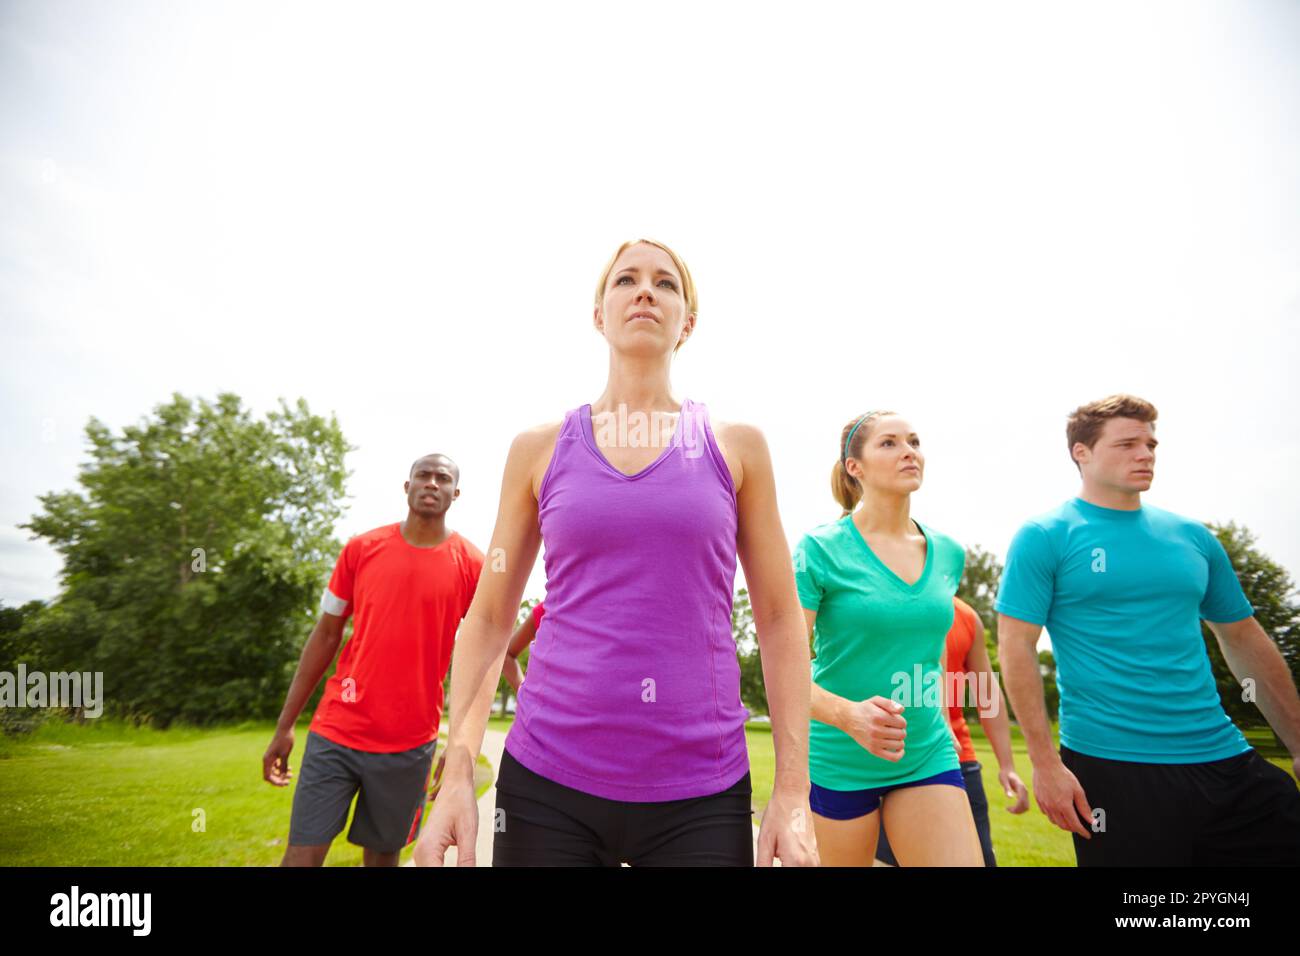 Take a breath. Low angle shot of a group of athletes exercising outdoors. Stock Photo